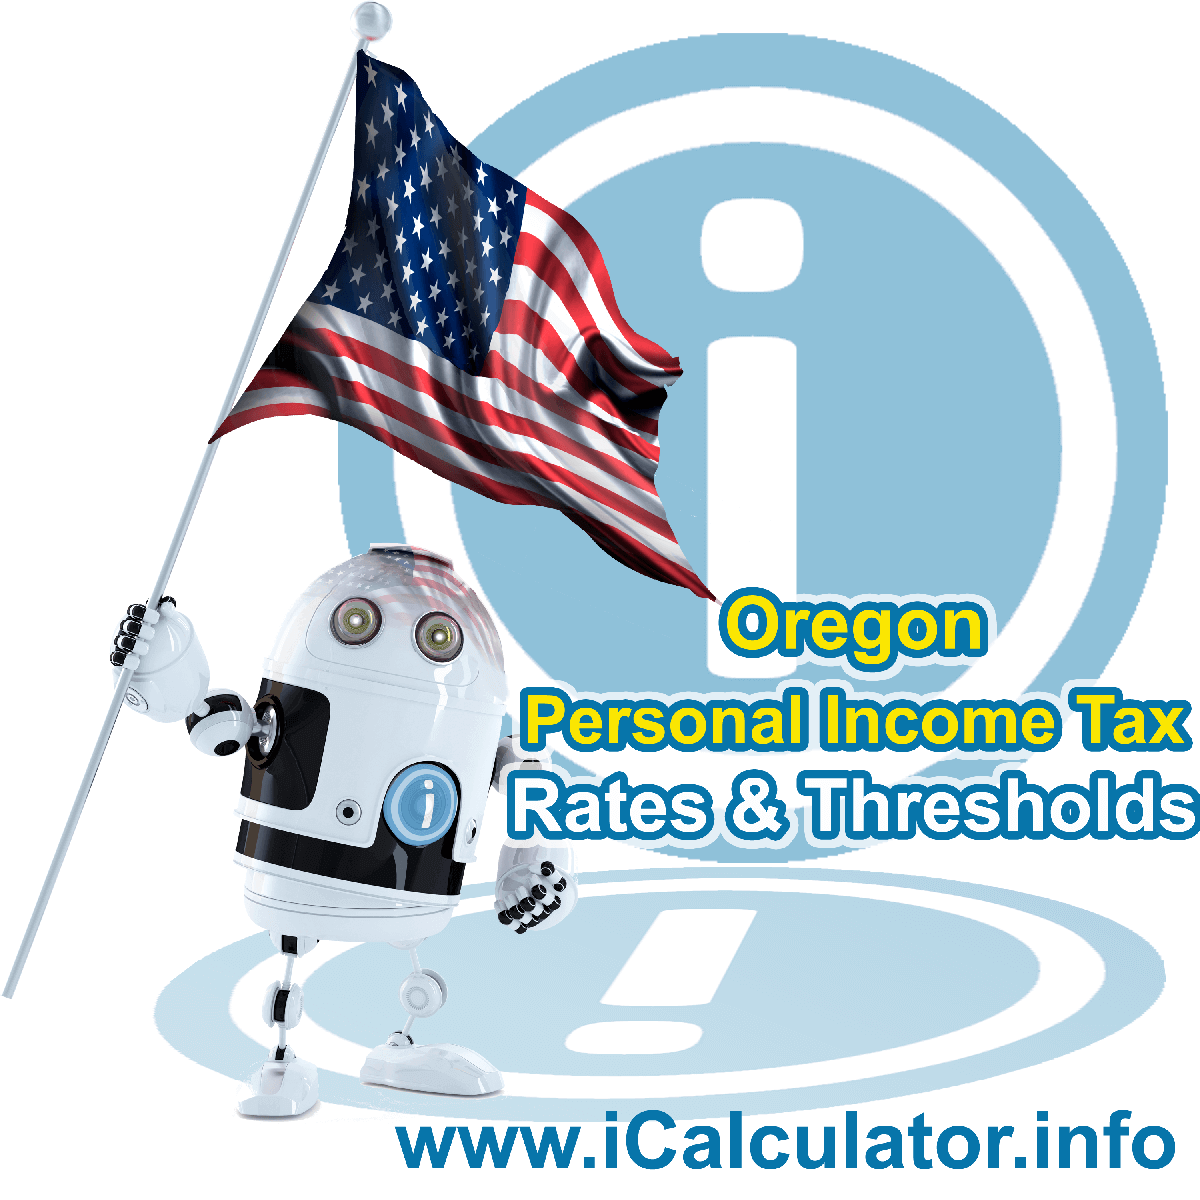 Oregon State Tax Tables 2017. This image displays details of the Oregon State Tax Tables for the 2017 tax return year which is provided in support of the 2017 US Tax Calculator